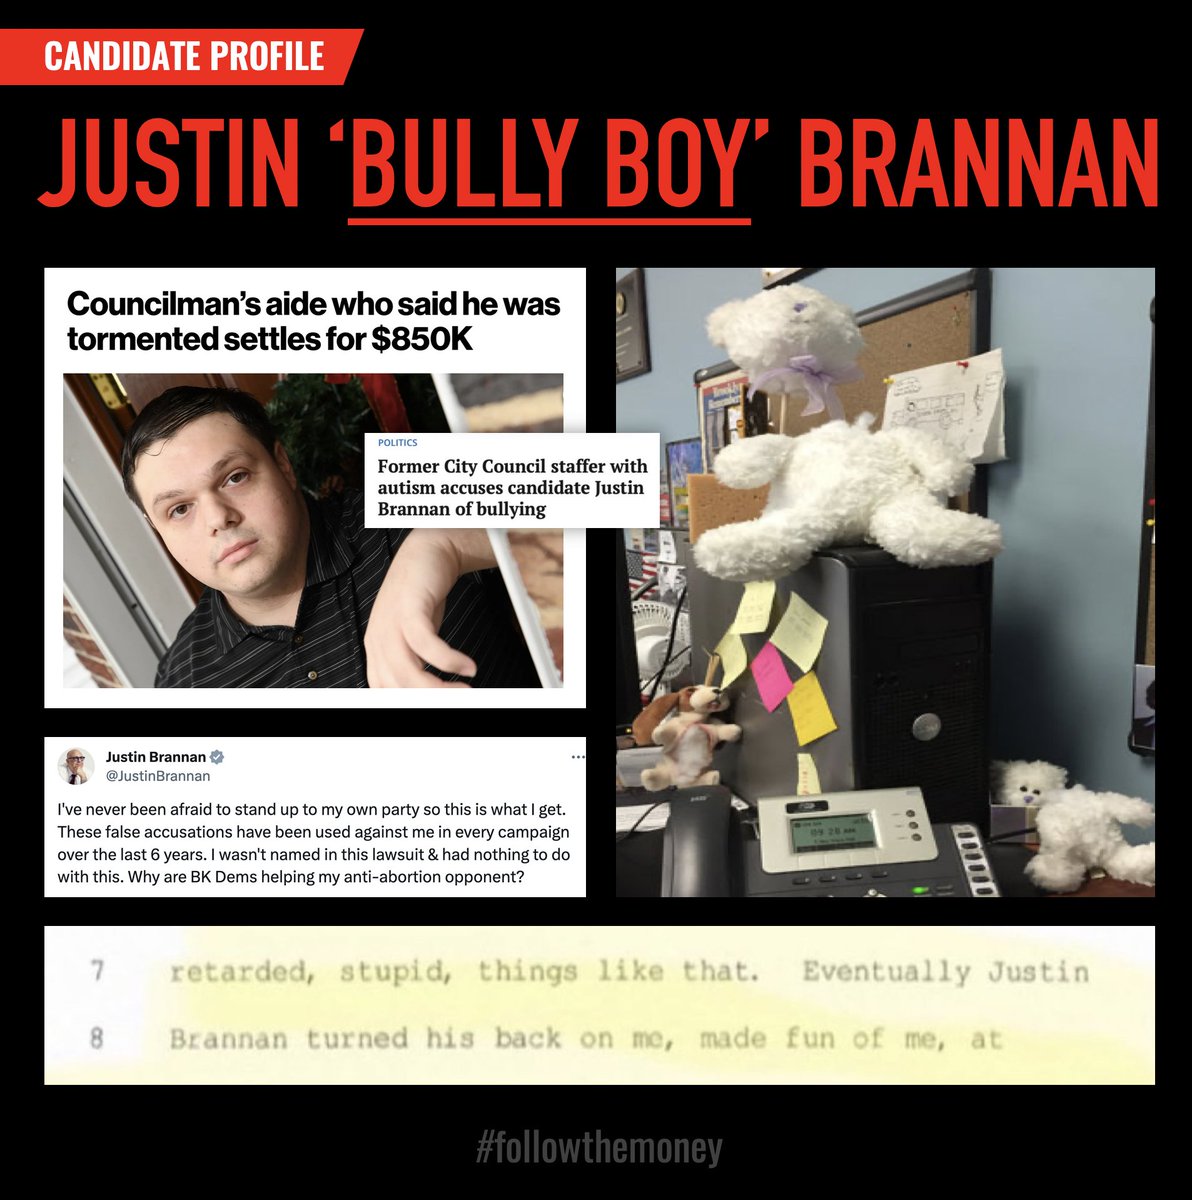 @Julio_PenaBK @JustinBrannan @agounardes @KpswalshP @JacquiPainter @HannaDL64 @benjaweiner @ToriBurhans 🔎 Justin Brannan AUTISTIC STAFFER bullying cost City $850k.

“During my time there, I suffered daily. I had humiliating experiences, like being locked in the basement as some type of unwanted creature, something that Brannan laughed heartily at.”